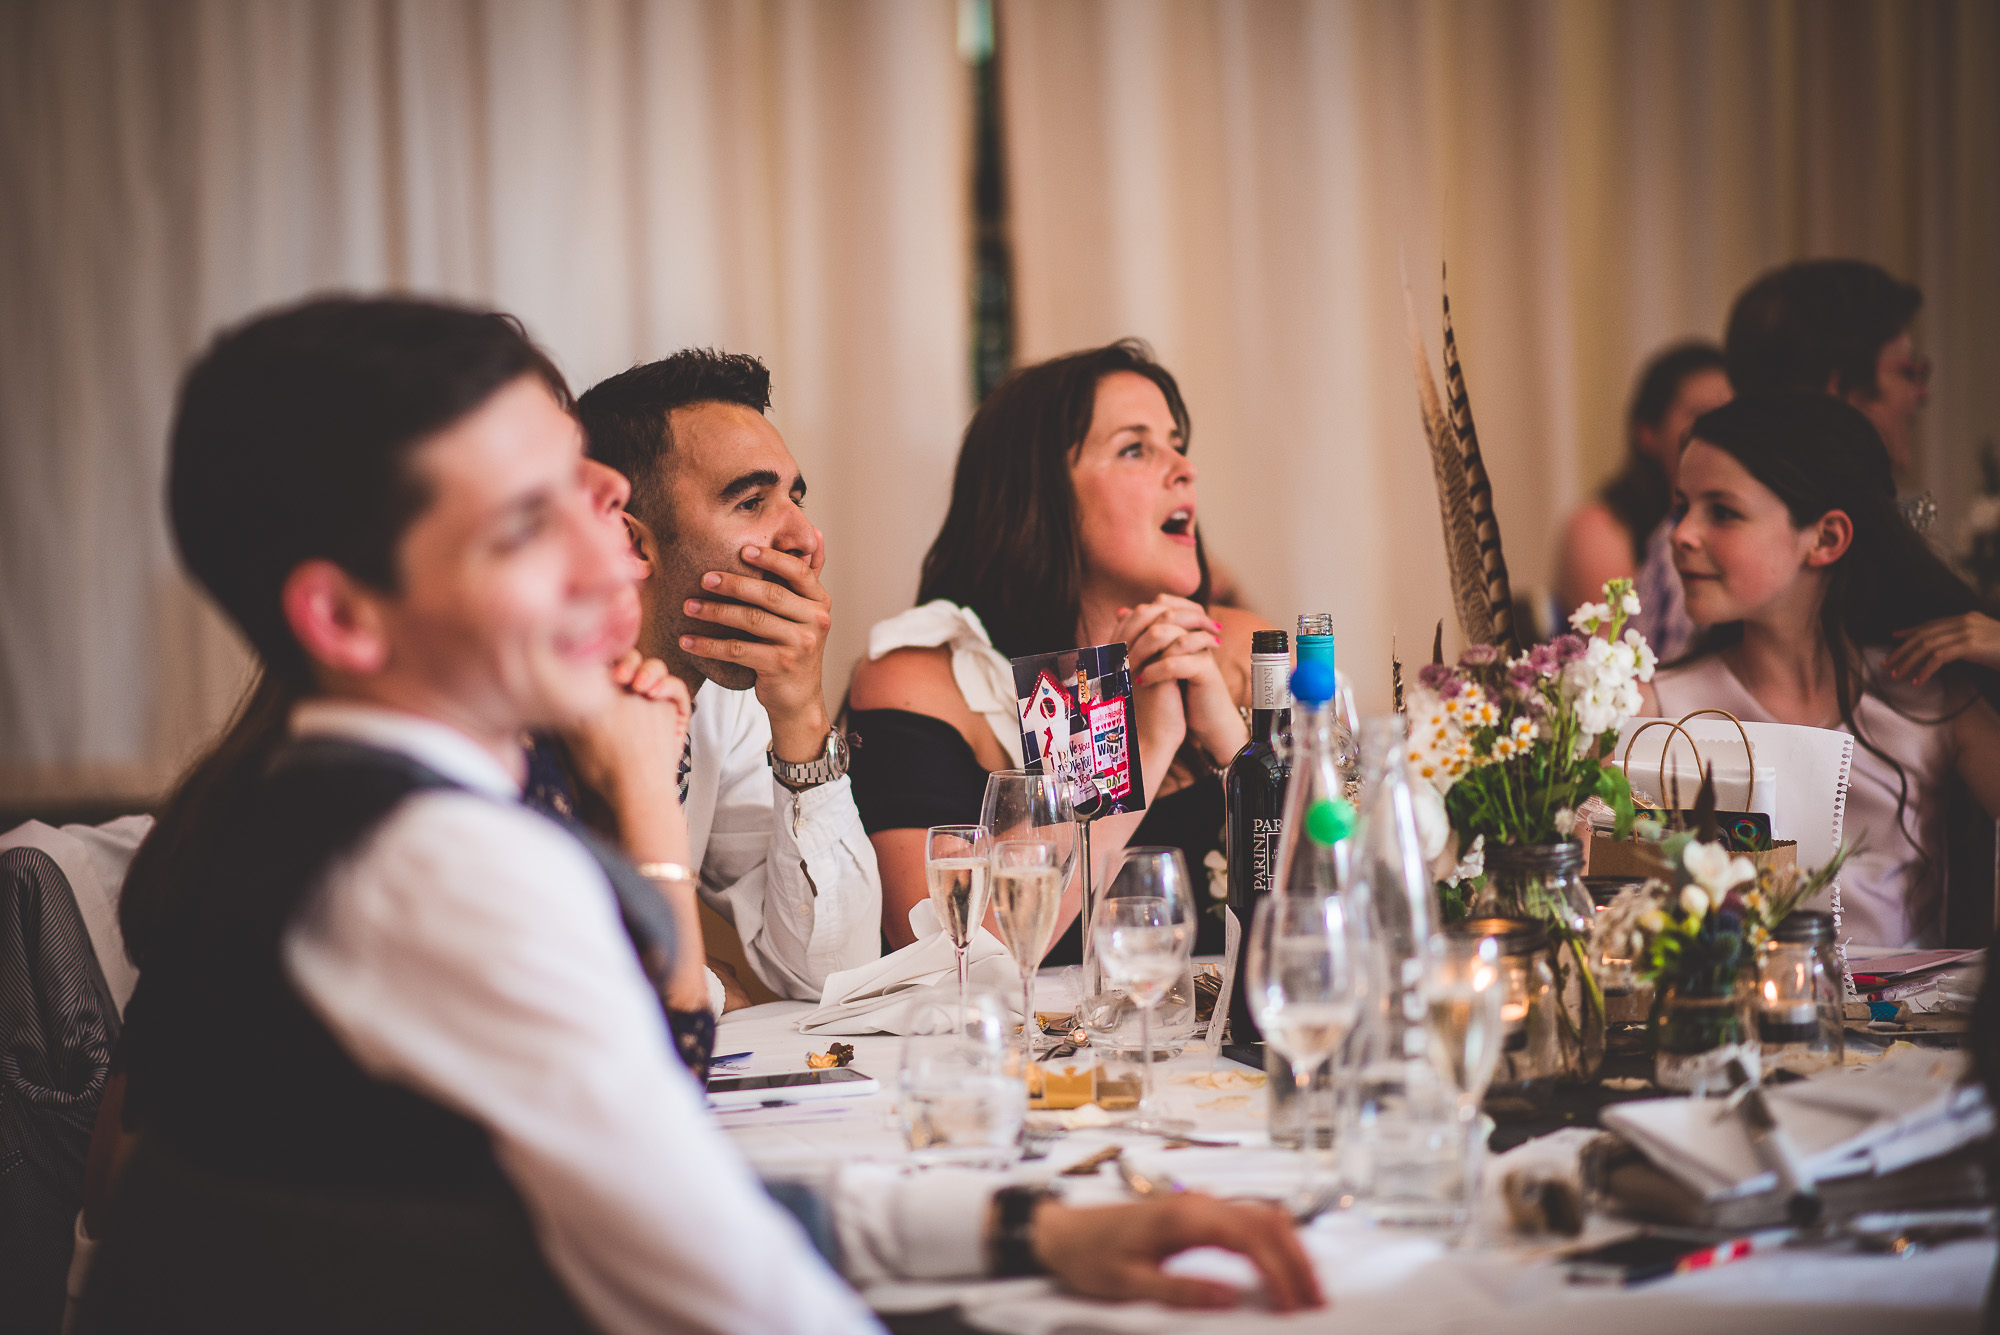 A group of people at a wedding table with the bride and a wedding photographer.